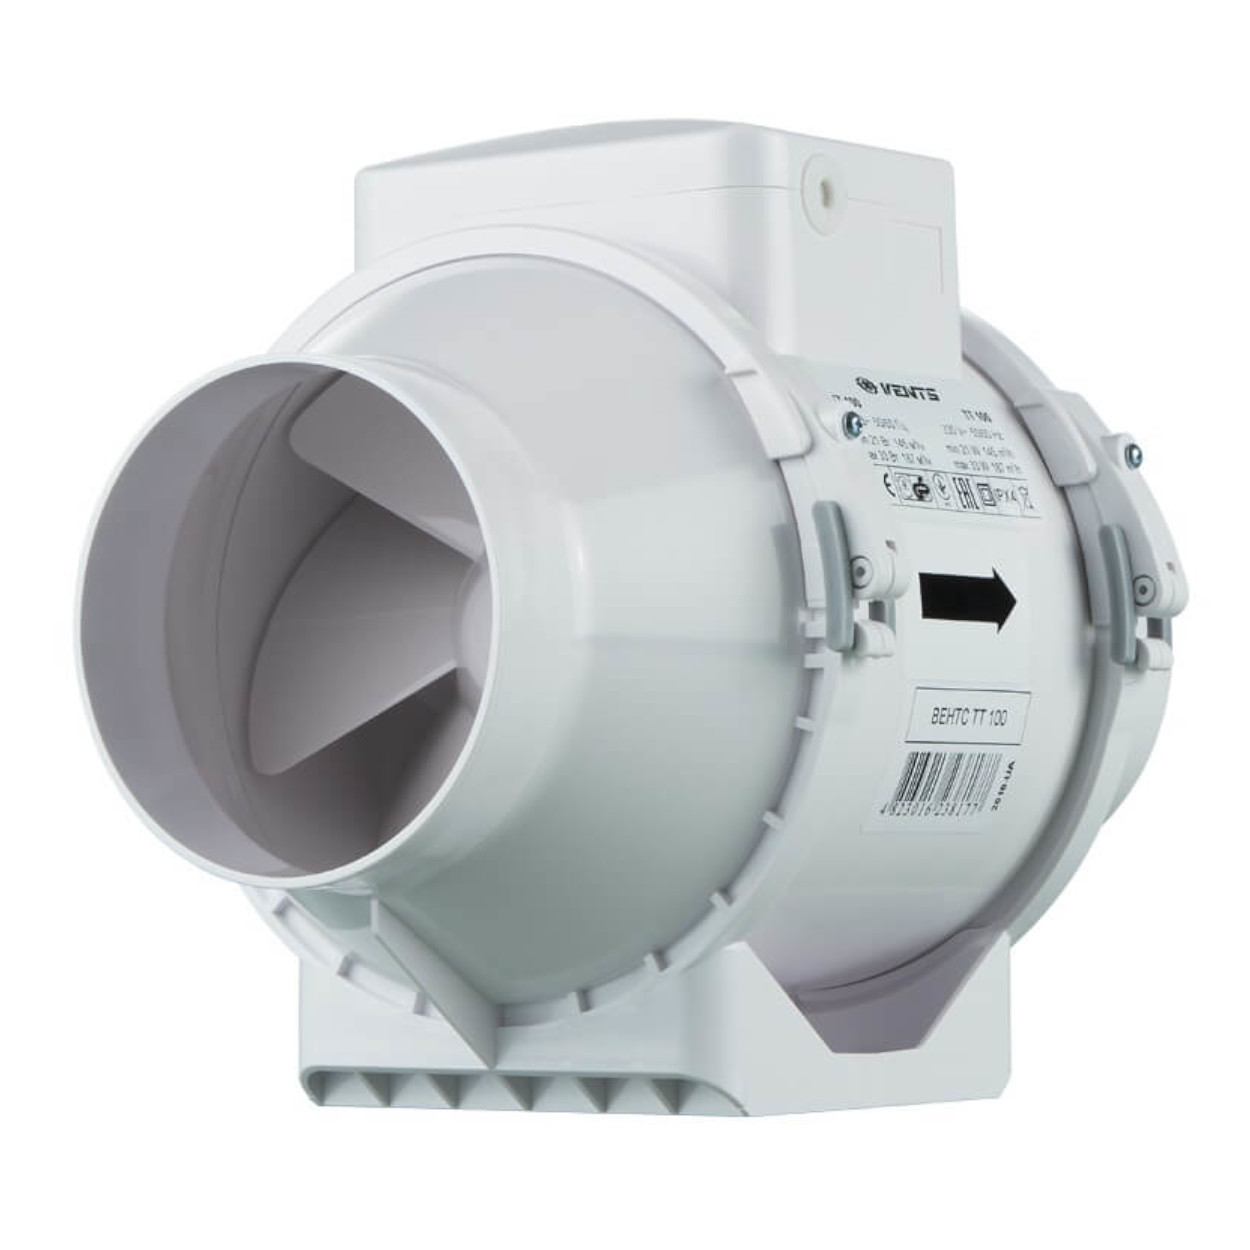 Mixed-flow inline fan range Vents TT 150 up to 520 m³/h IPX4 | Home & Commercial Heaters, Ventilation & Ceiling Fans |